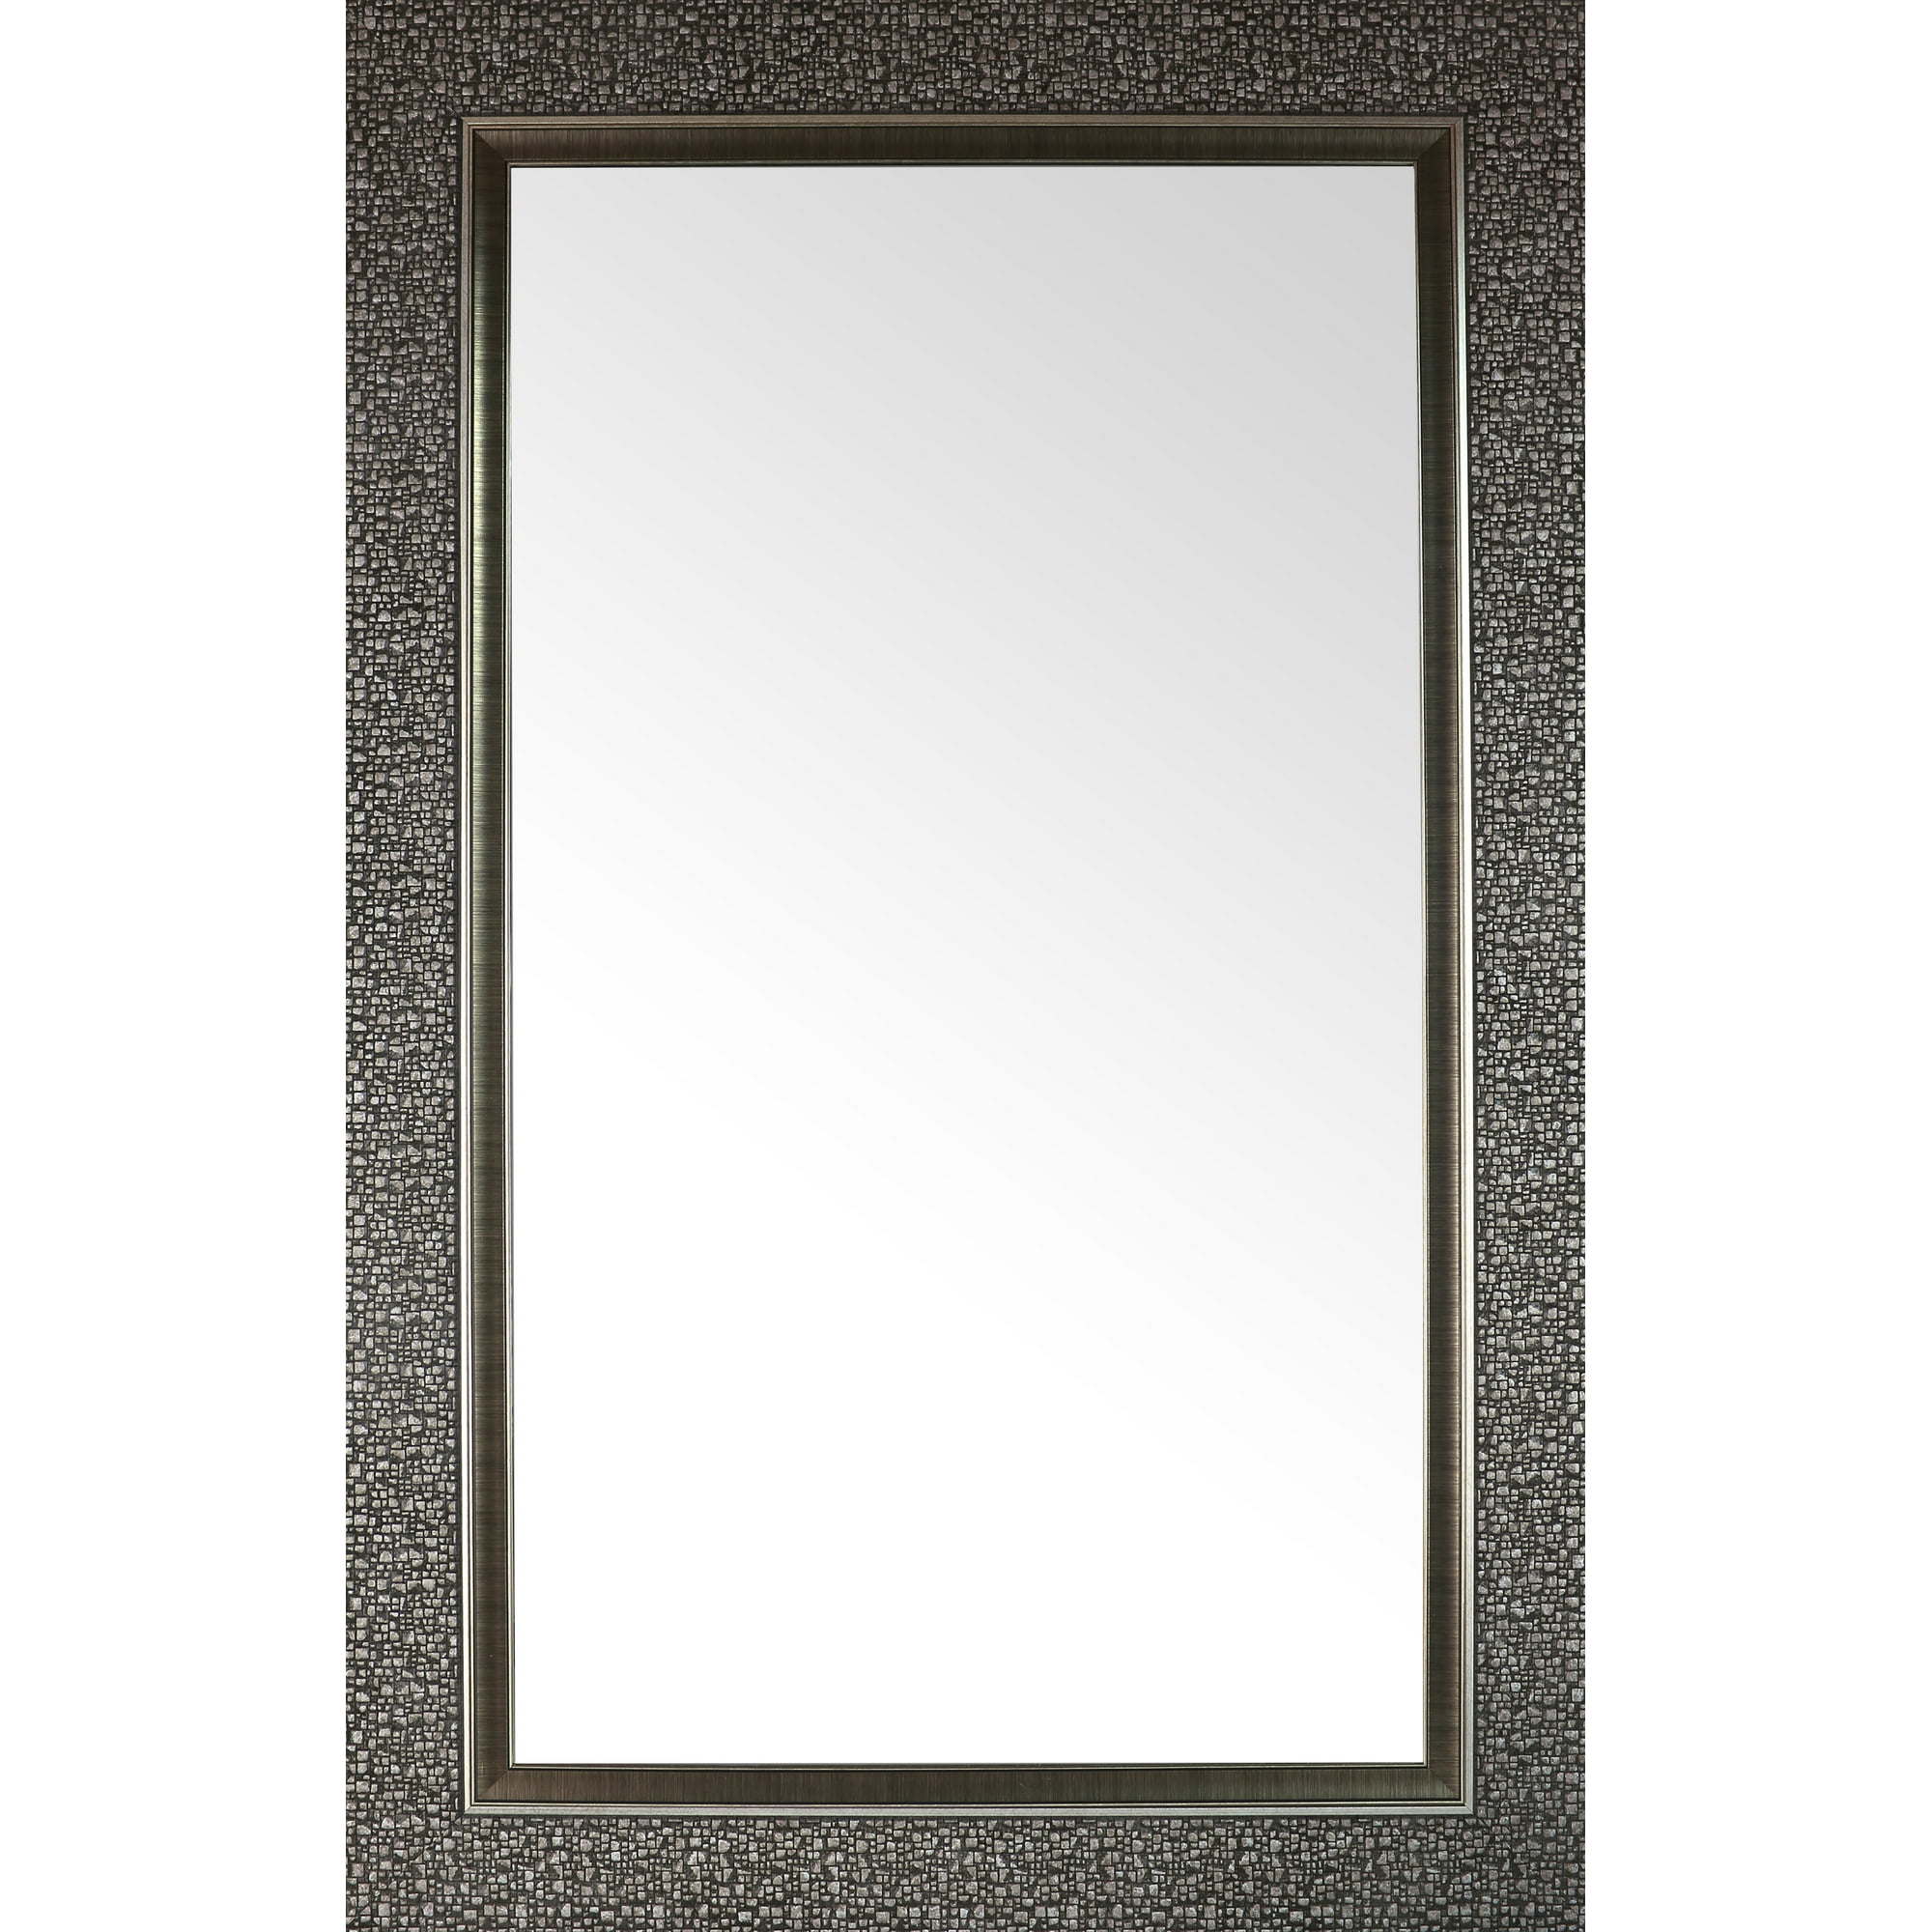 Mirrorize Canada Mosaic Frame Wall, Large Decorative Mirrors For Bathrooms